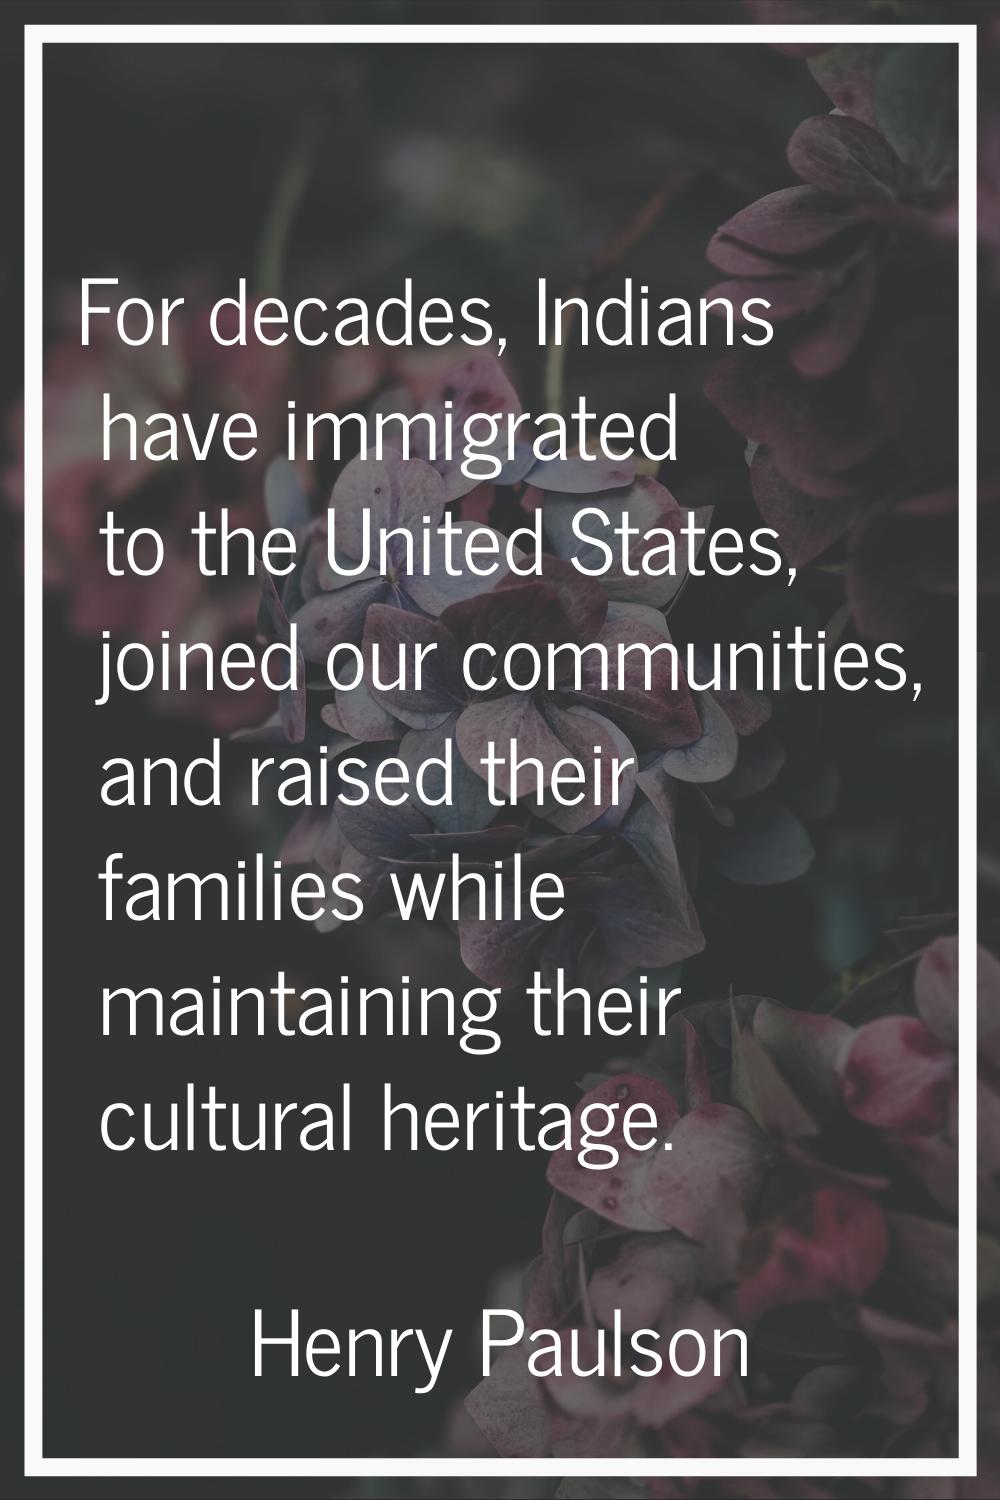 For decades, Indians have immigrated to the United States, joined our communities, and raised their